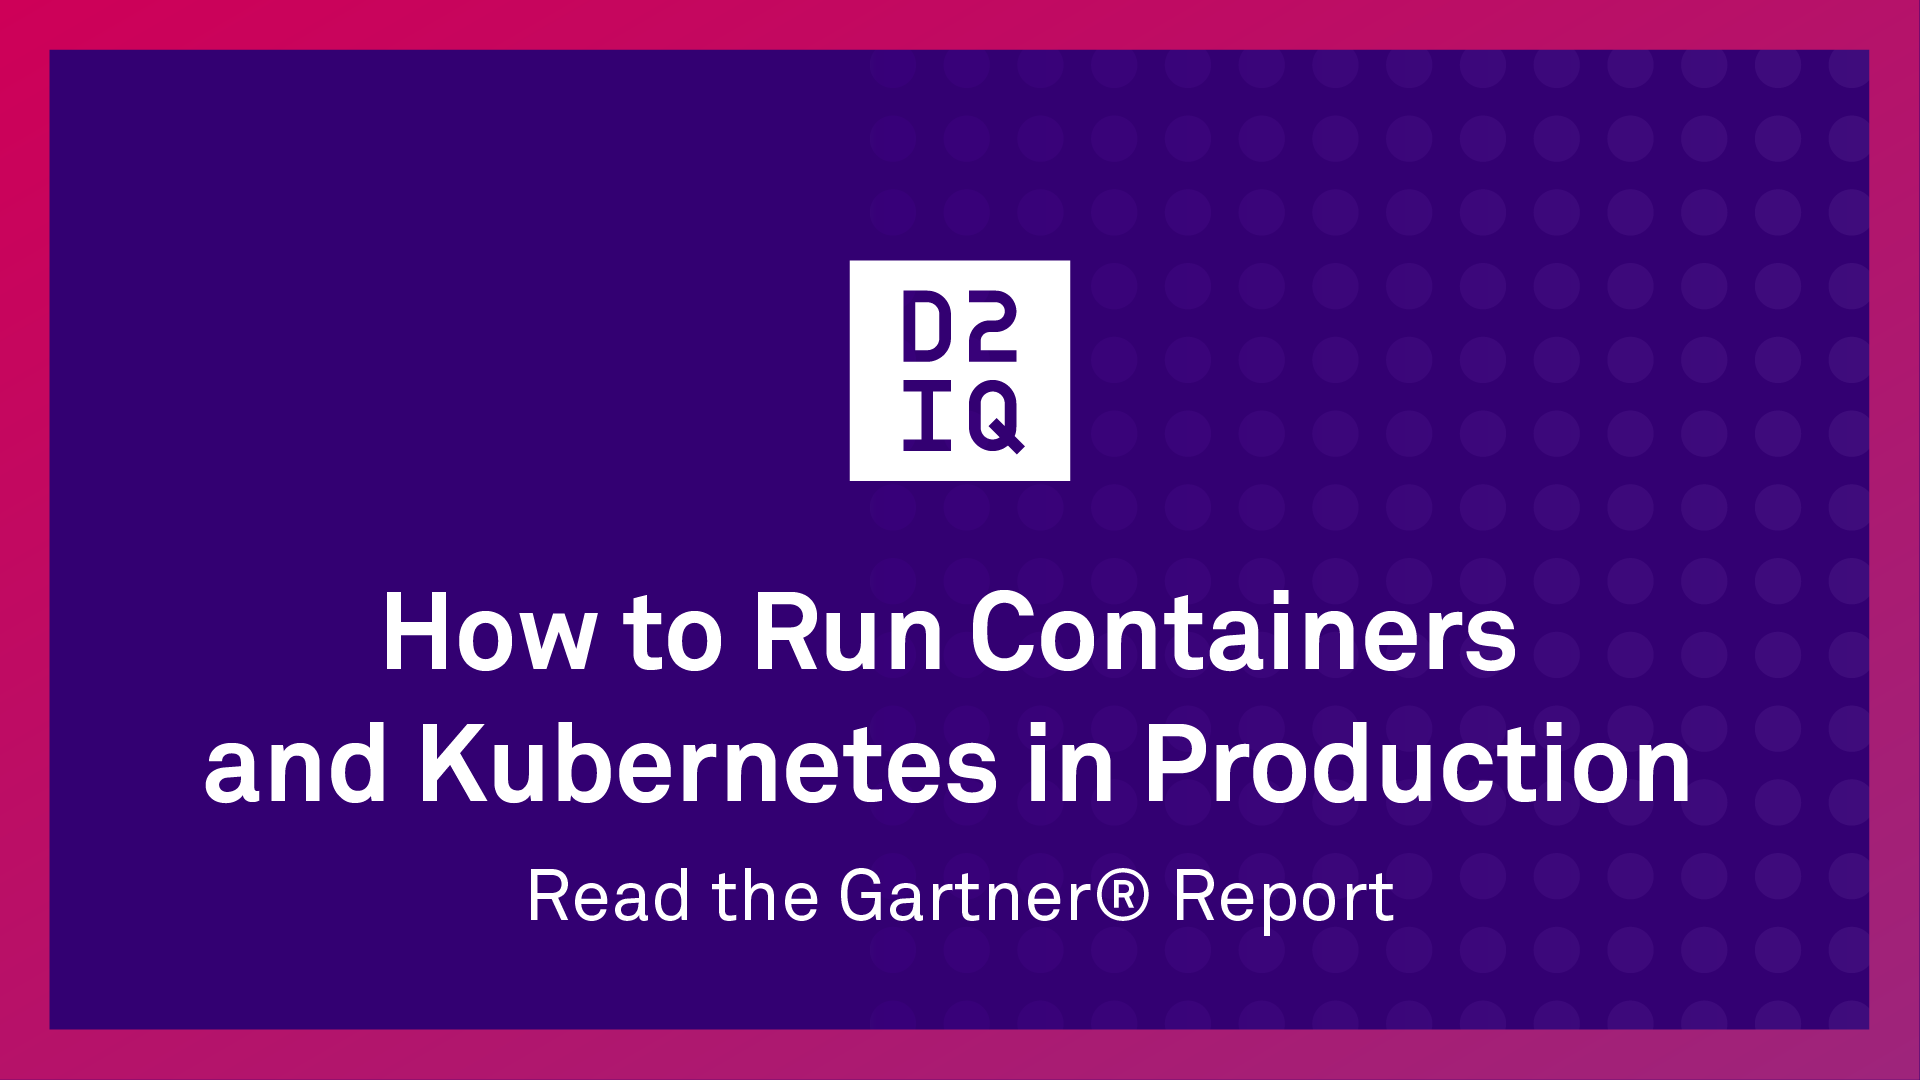 Run Containers and Kubernetes in Production – The Gartner® report